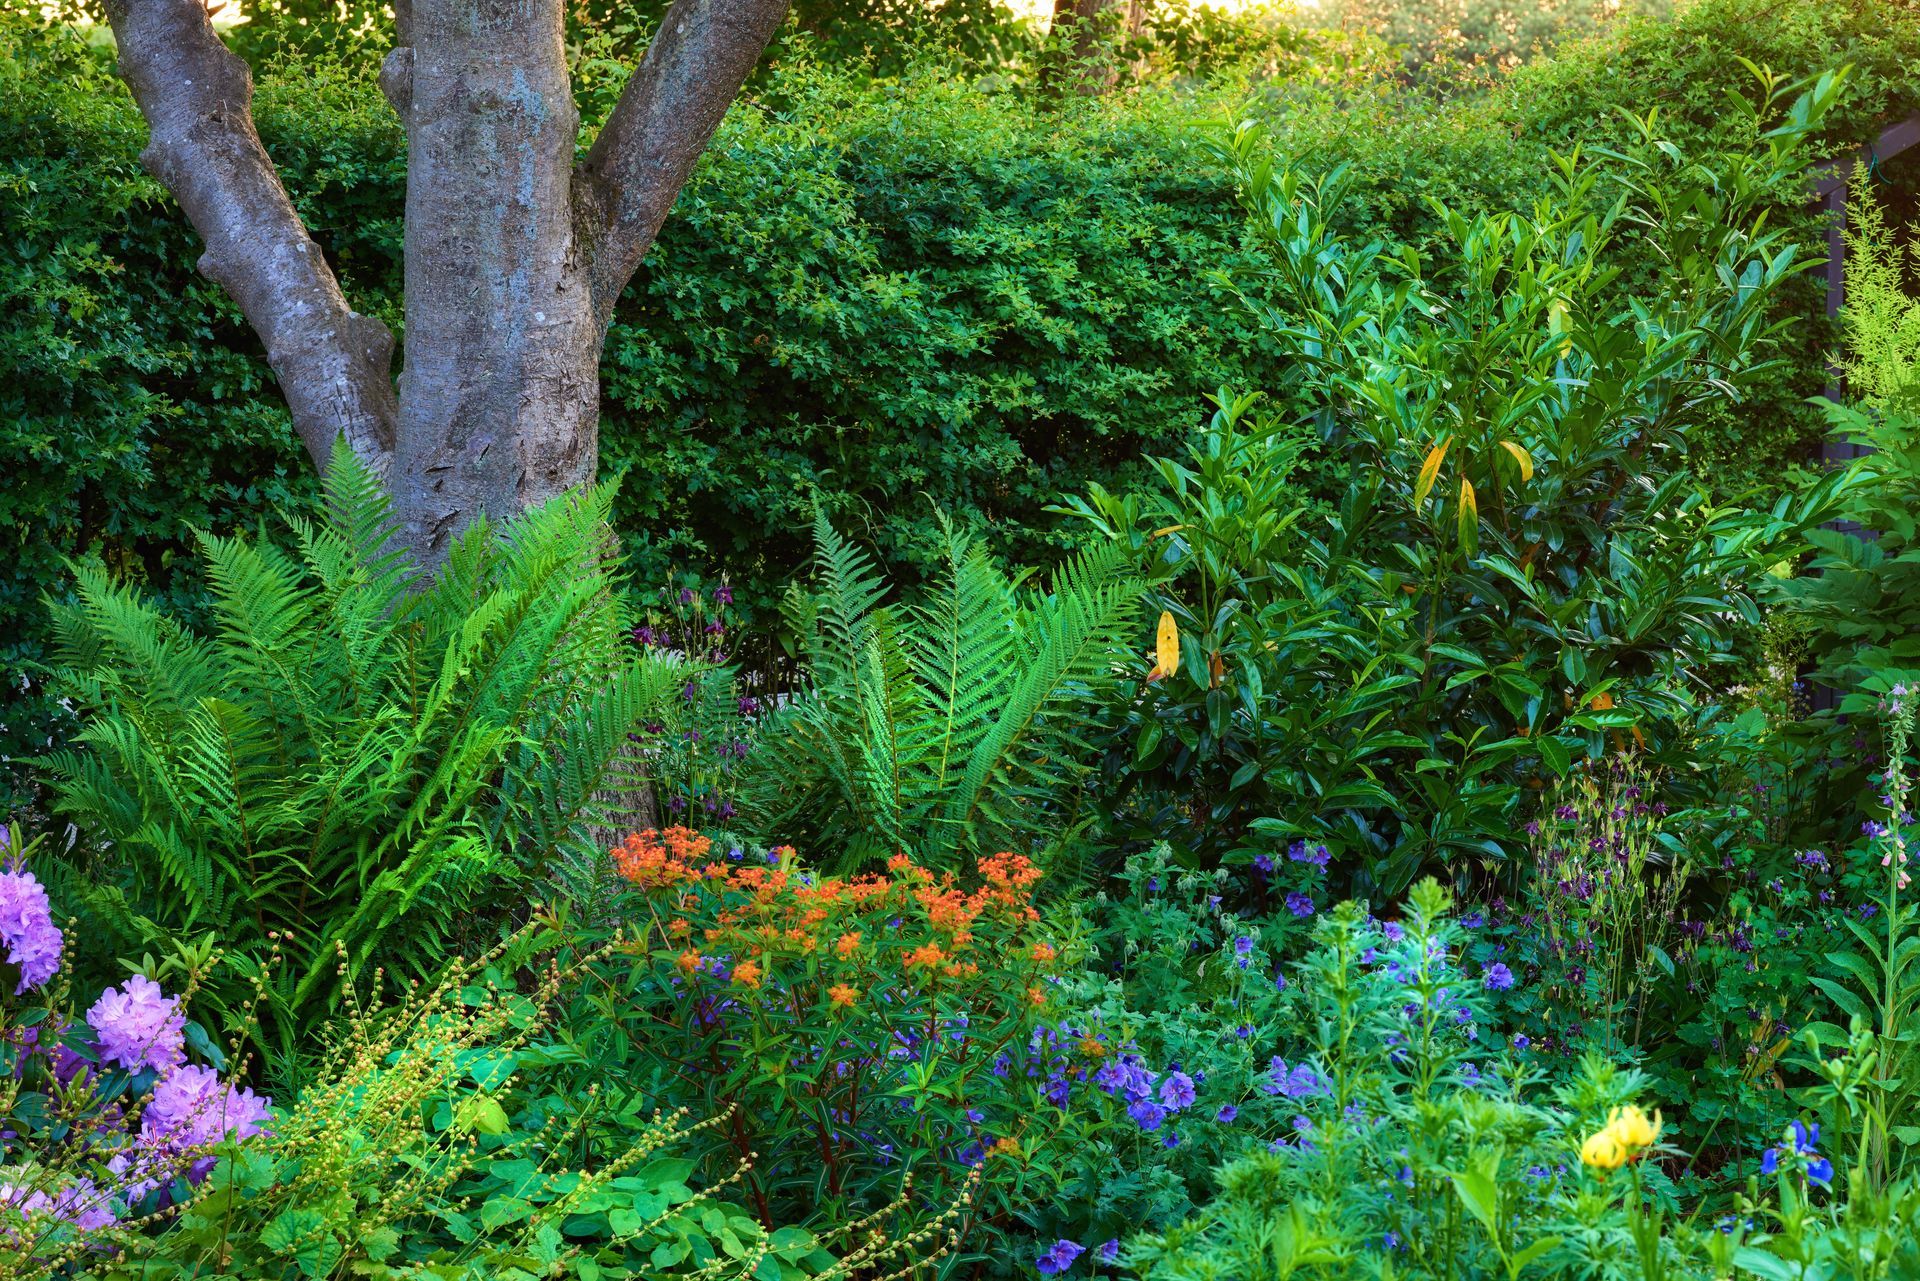 A landscaped patch of land using companion planting